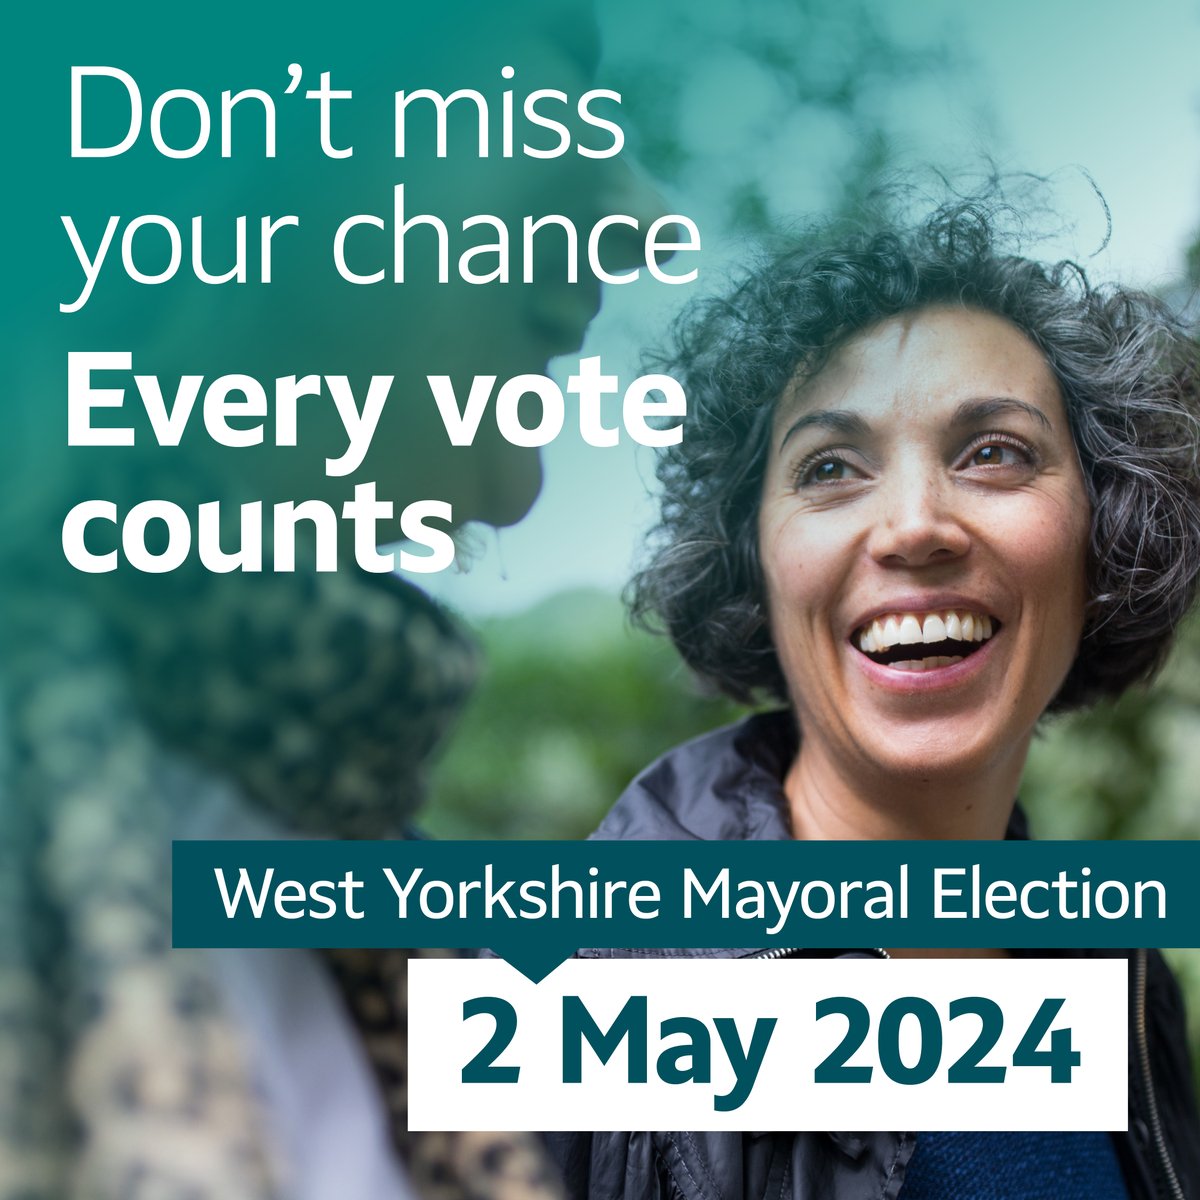 🗳️ Attention all voters, don't forget about the new photo ID requirements for the 2 May elections that are happening tomorrow. 

Stay updated on what you need to bring to the polls at WYelects.co.uk. 

Don’t miss your chance, every vote counts. #WYelects